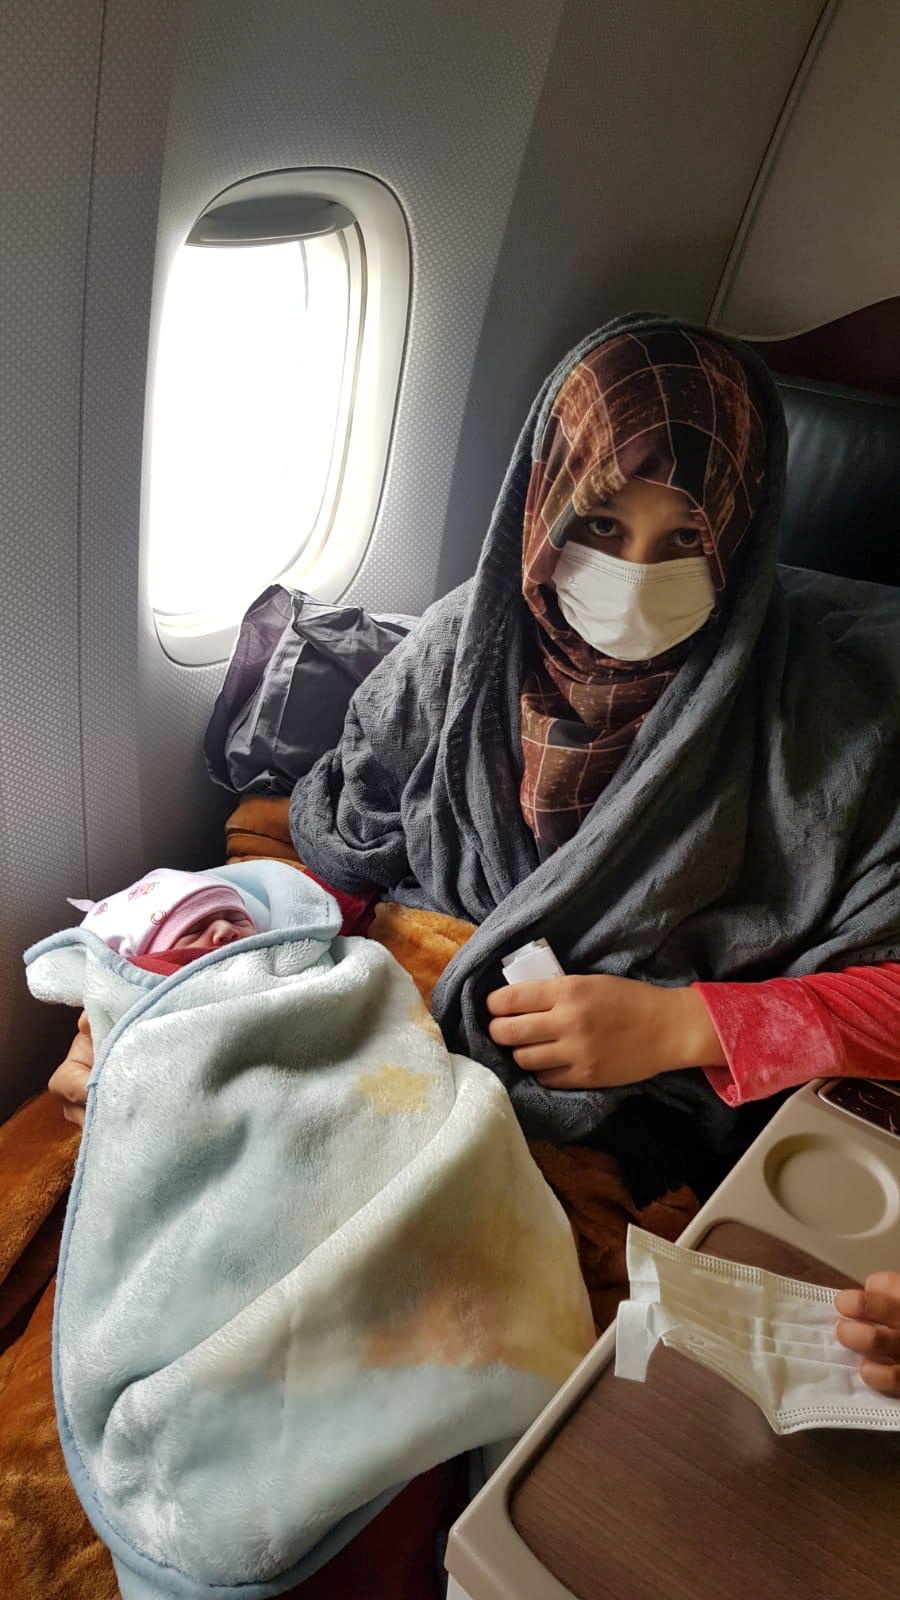 Afghan evacuee Soman Noori holds her newborn baby girl named Havva on board an evacuation flight operated by Turkish Airlines from Dubai to Britain's Birmingham, August 28, 2021. Turkish Airlines/Handout via REUTERS